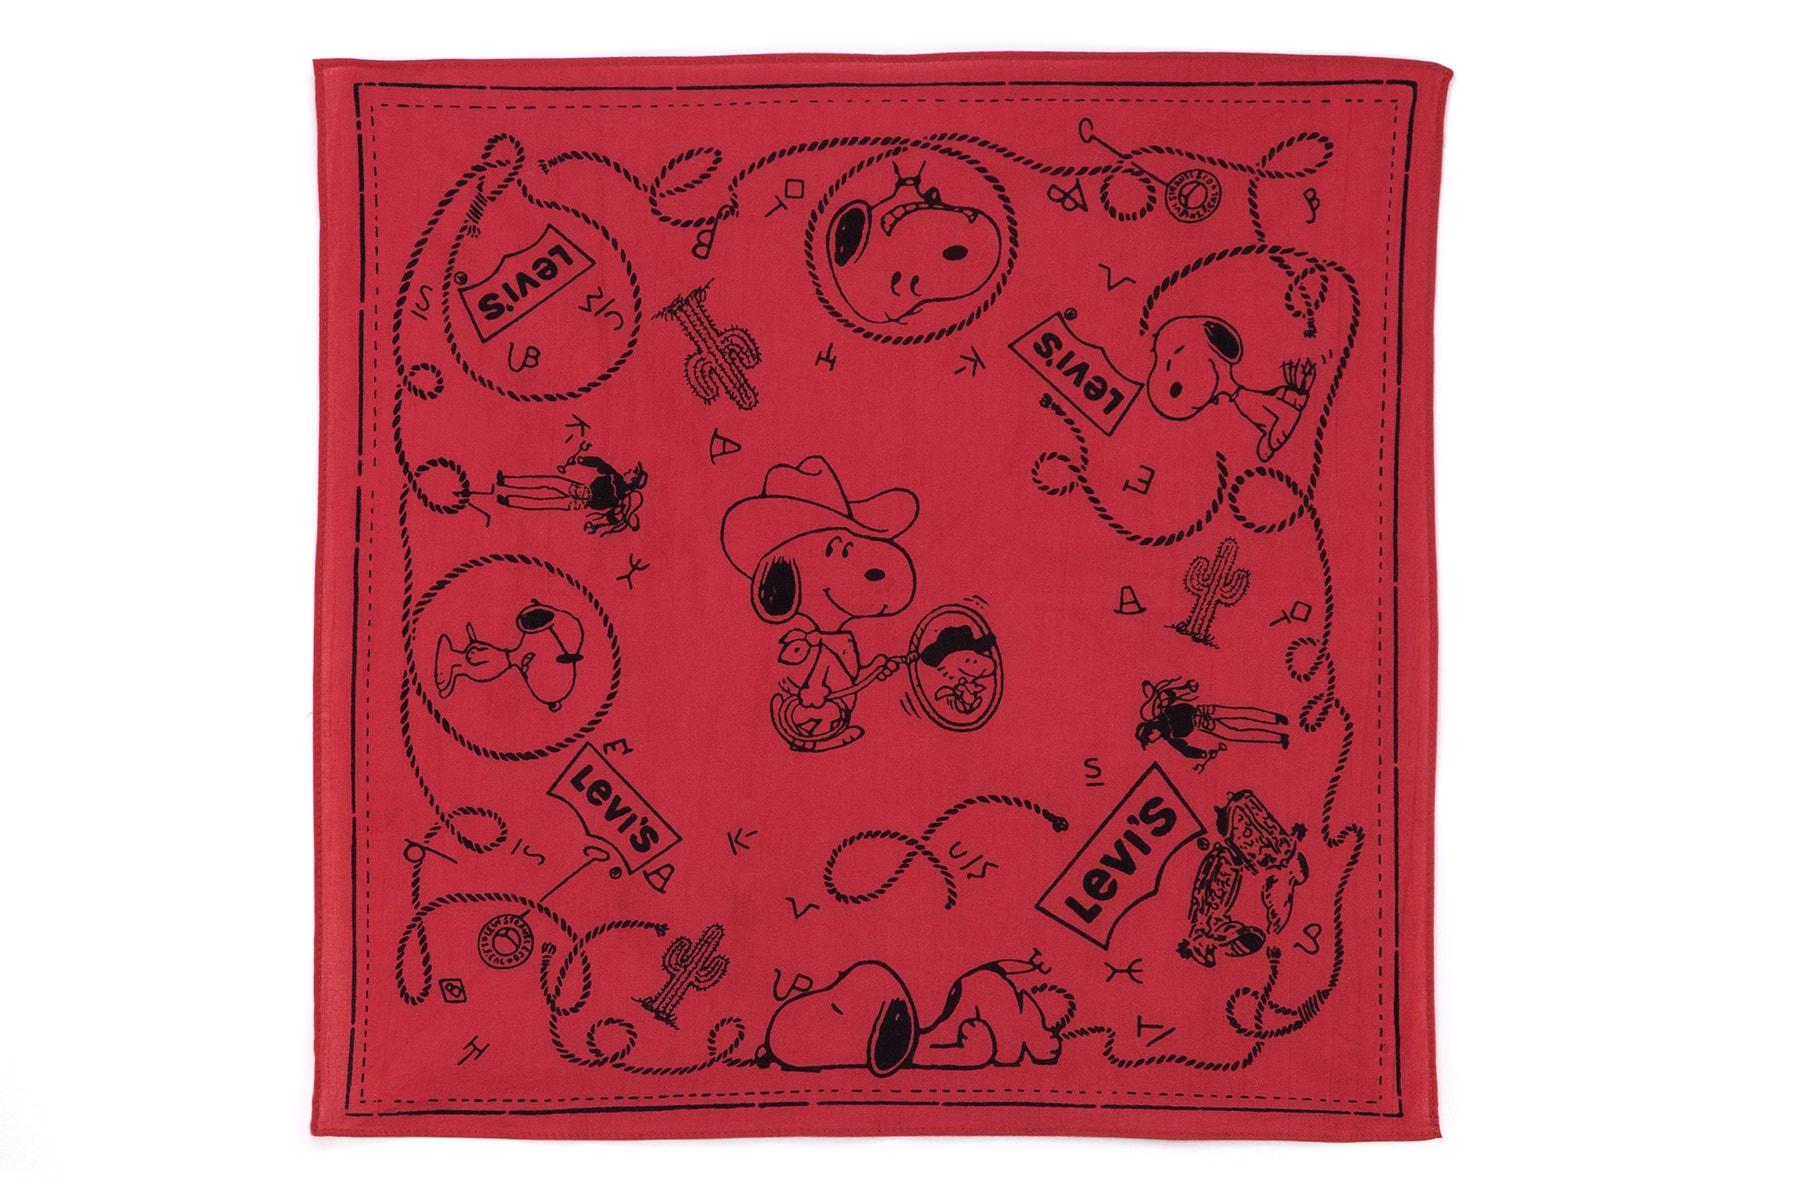 Levis Peanuts Snoopy Year of the Dog Collaboration Square Scarf Bandana